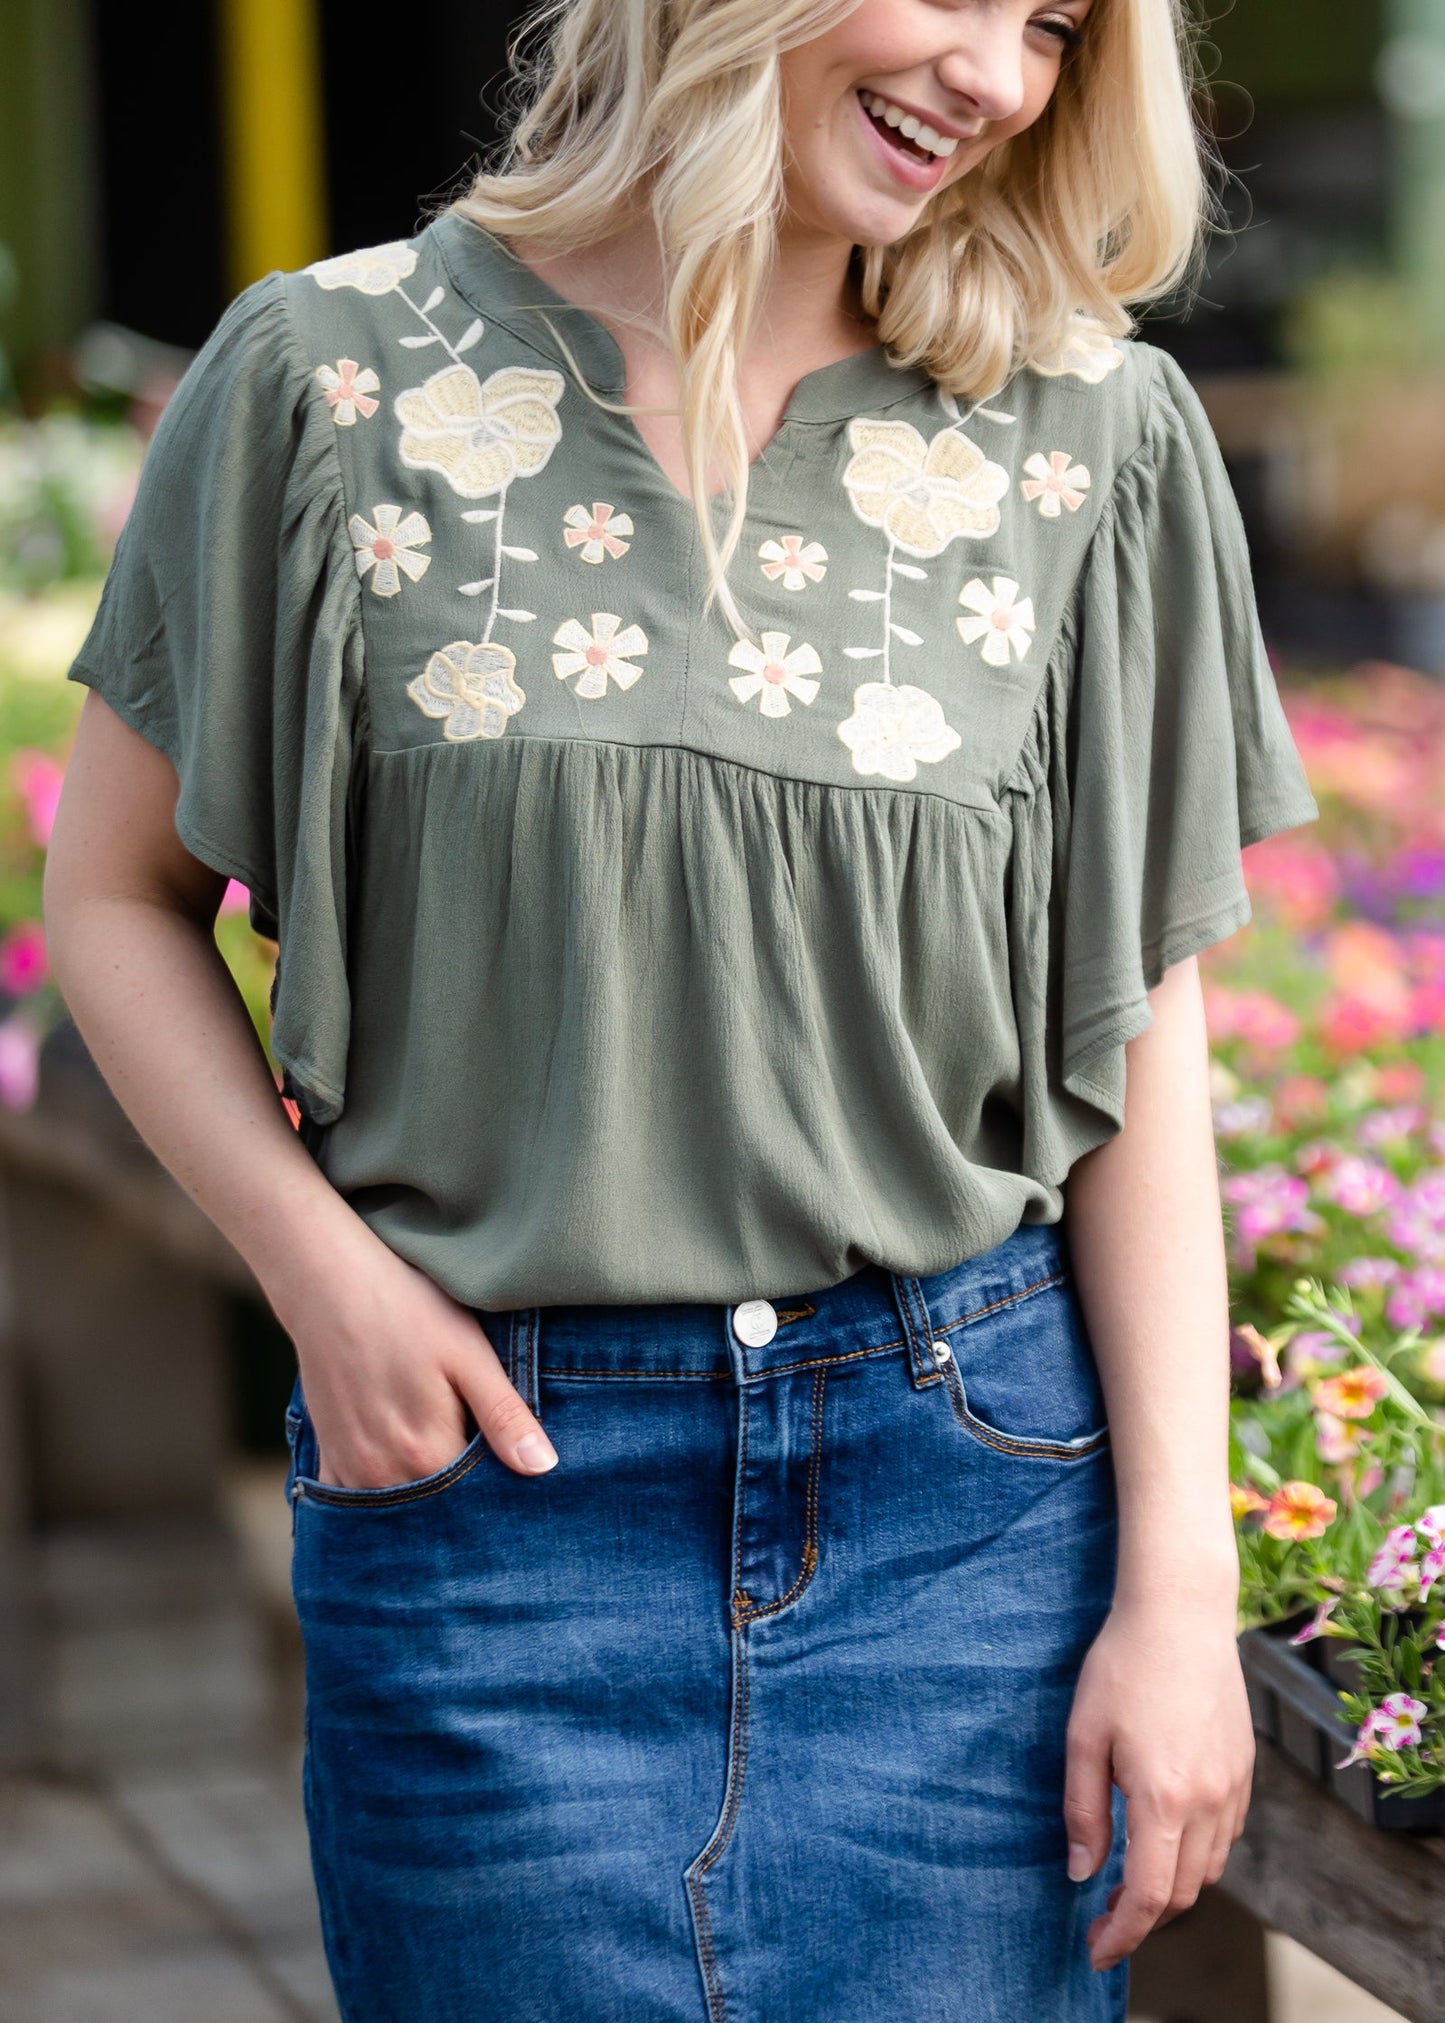 Floral Embroidered Ruffle Sleeve Top - FINAL SALE Tops